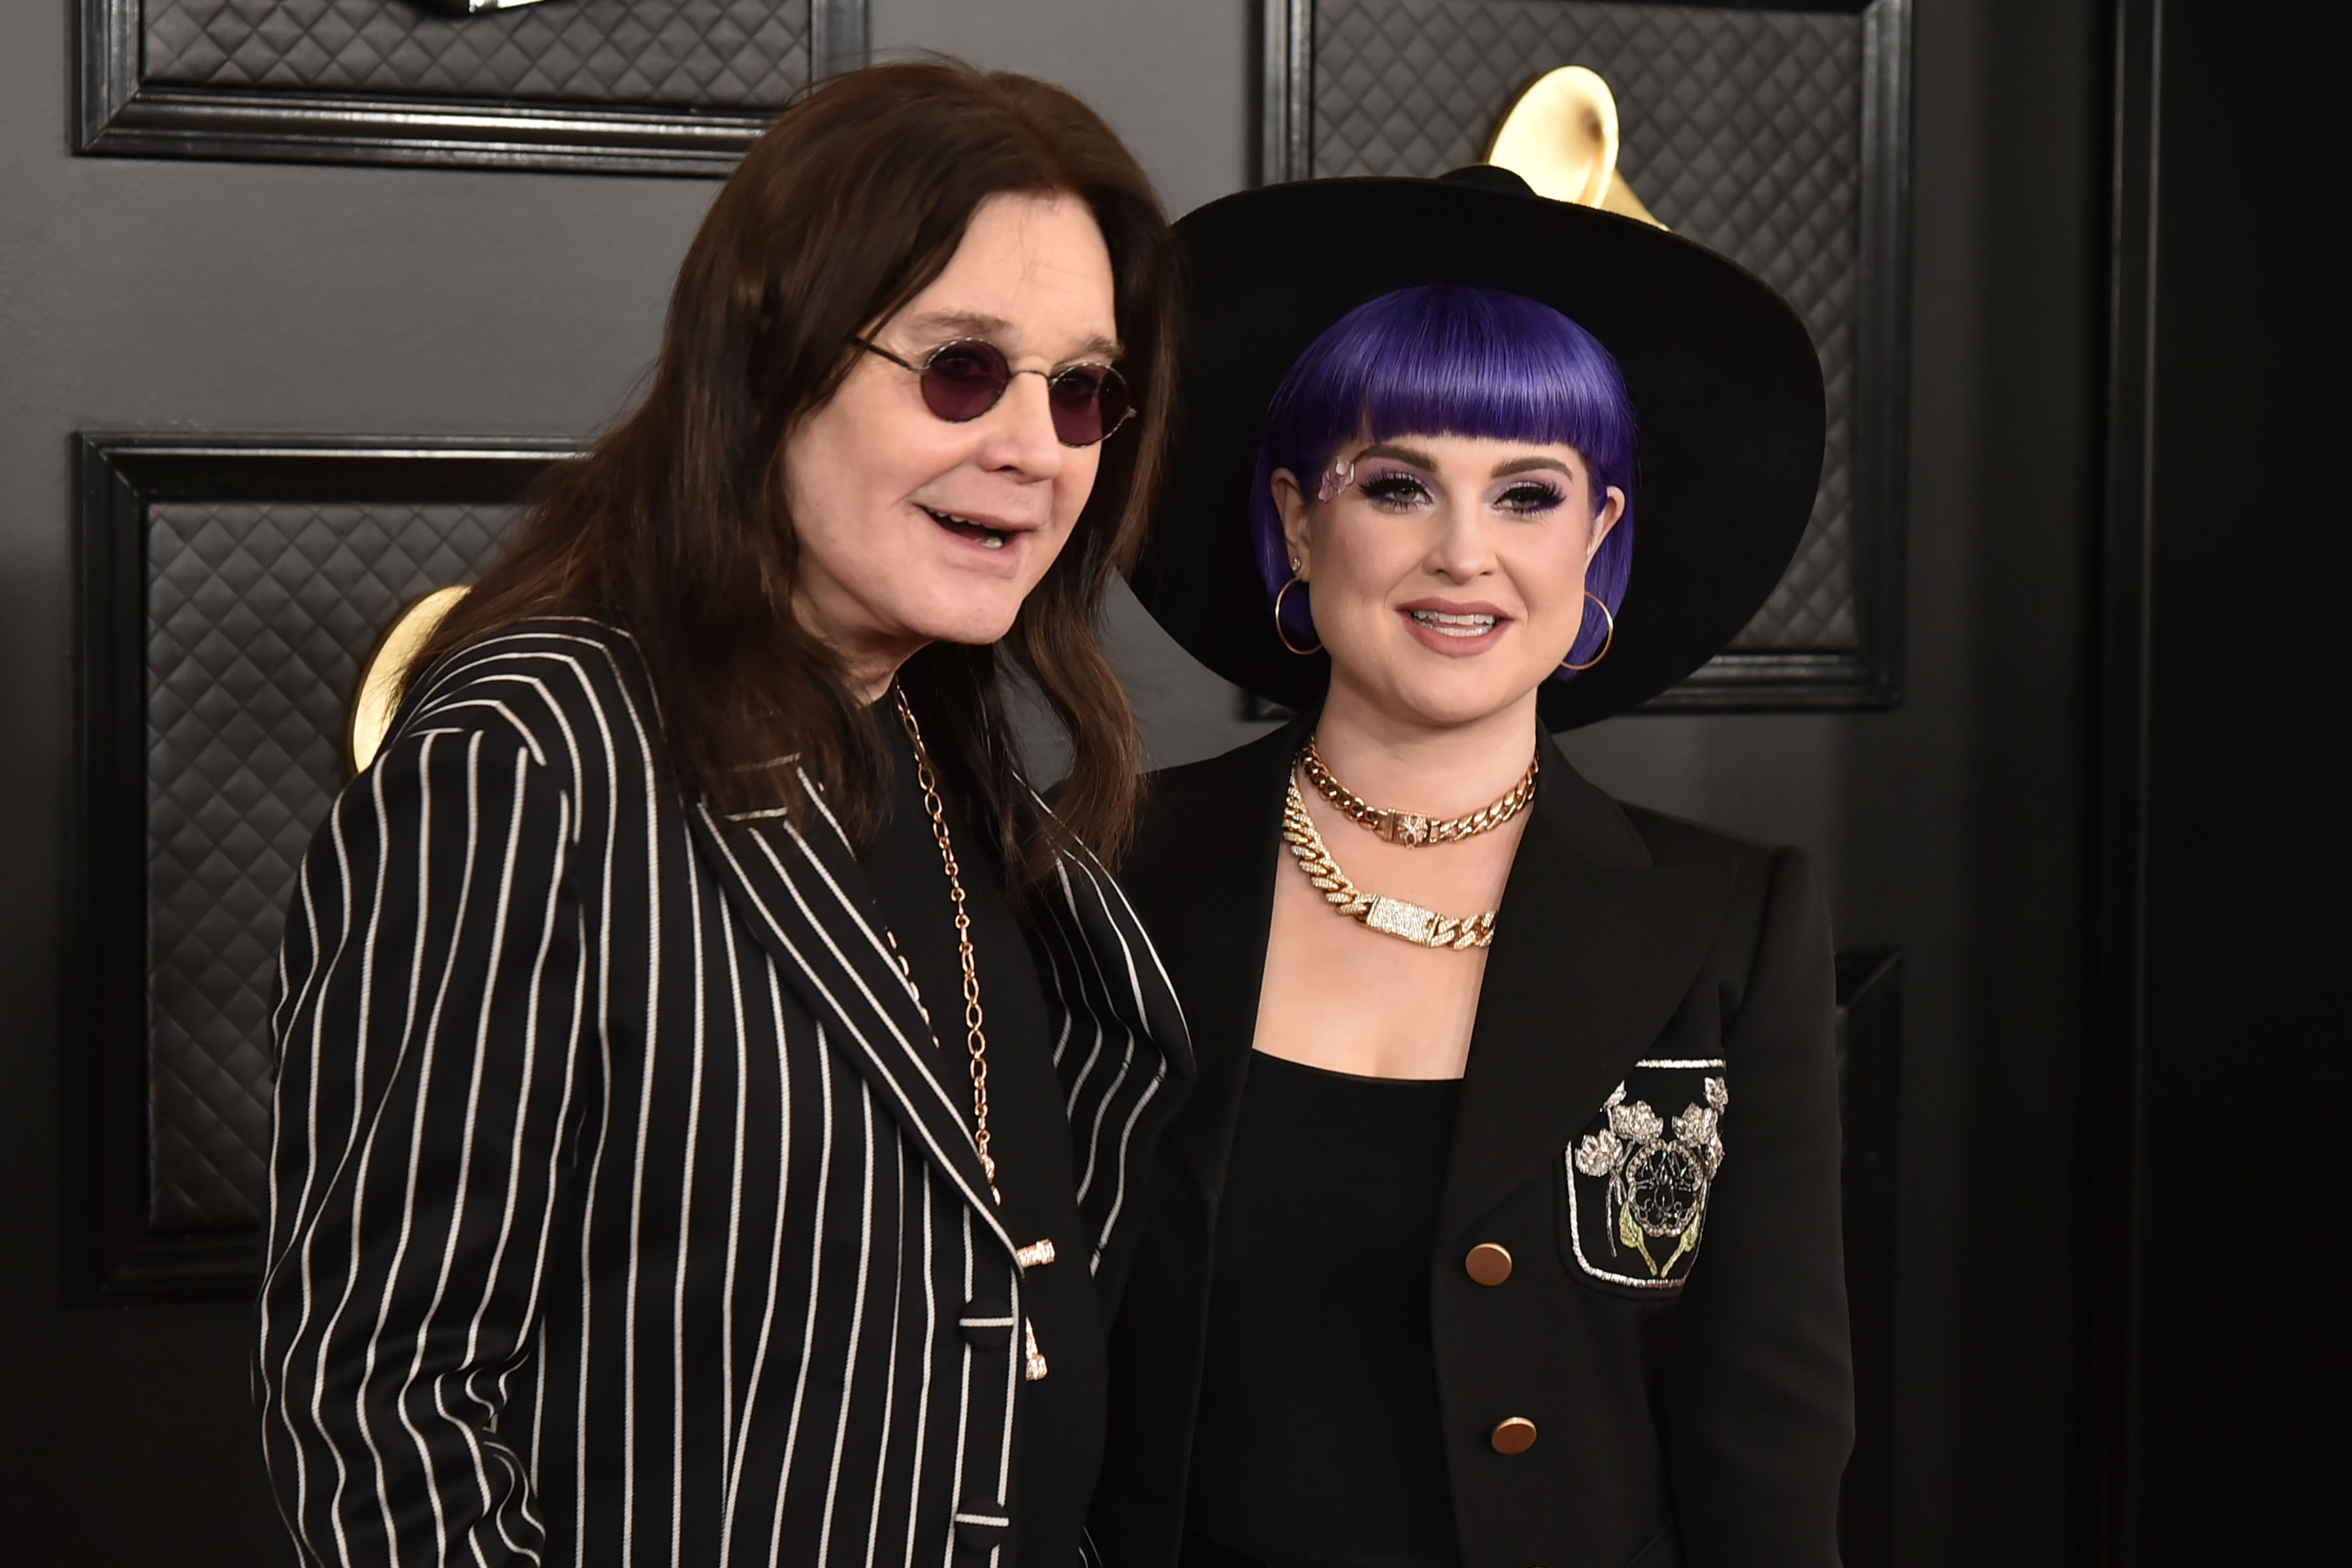 Ozzy and Kelly Osbourne at the 62nd Annual Grammy Awards on January 26, 2020, in Los Angeles, California | Source: Getty Images